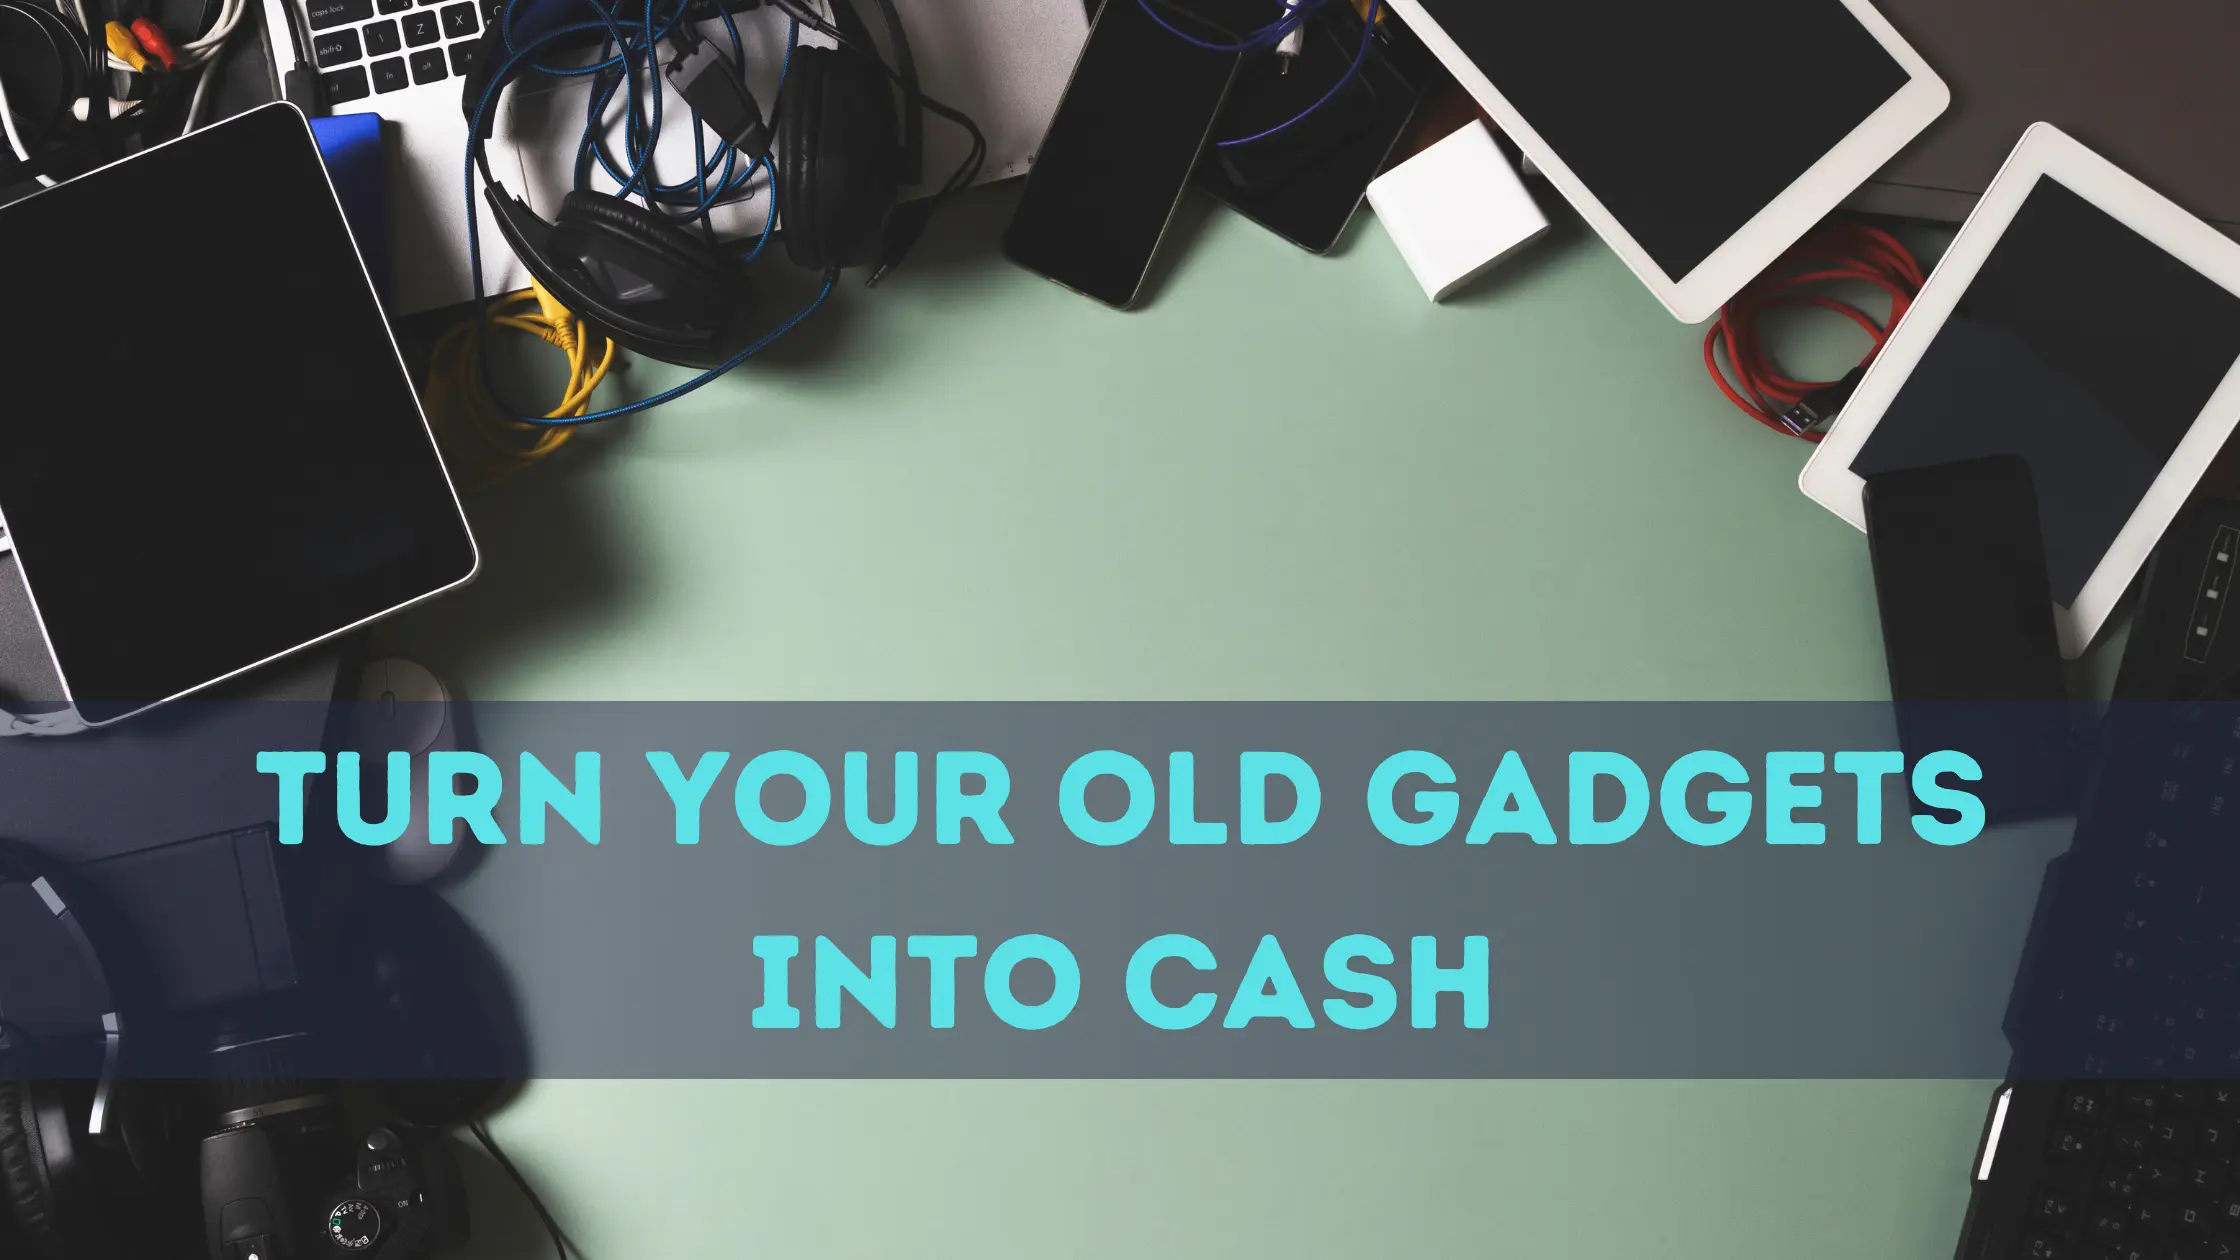 Turn Your Old Gadgets into Cash